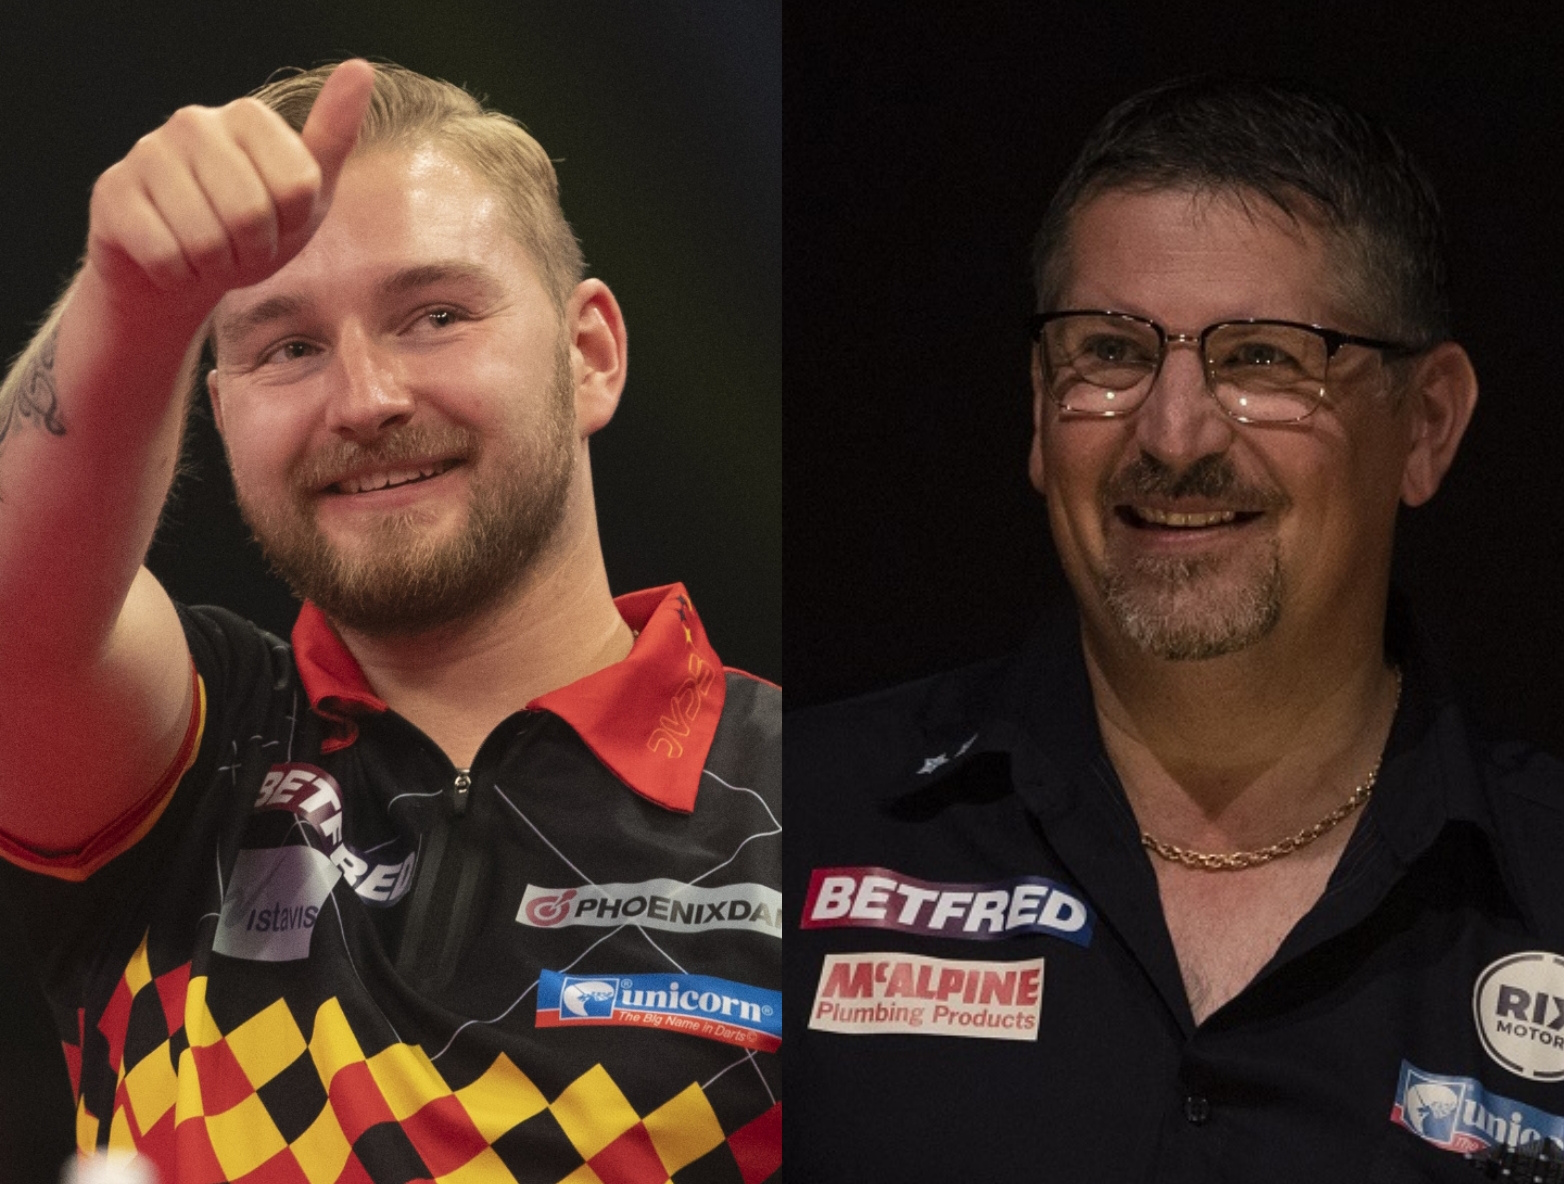 Anderson & Van den Bergh to battle it out for Matchplay crown!